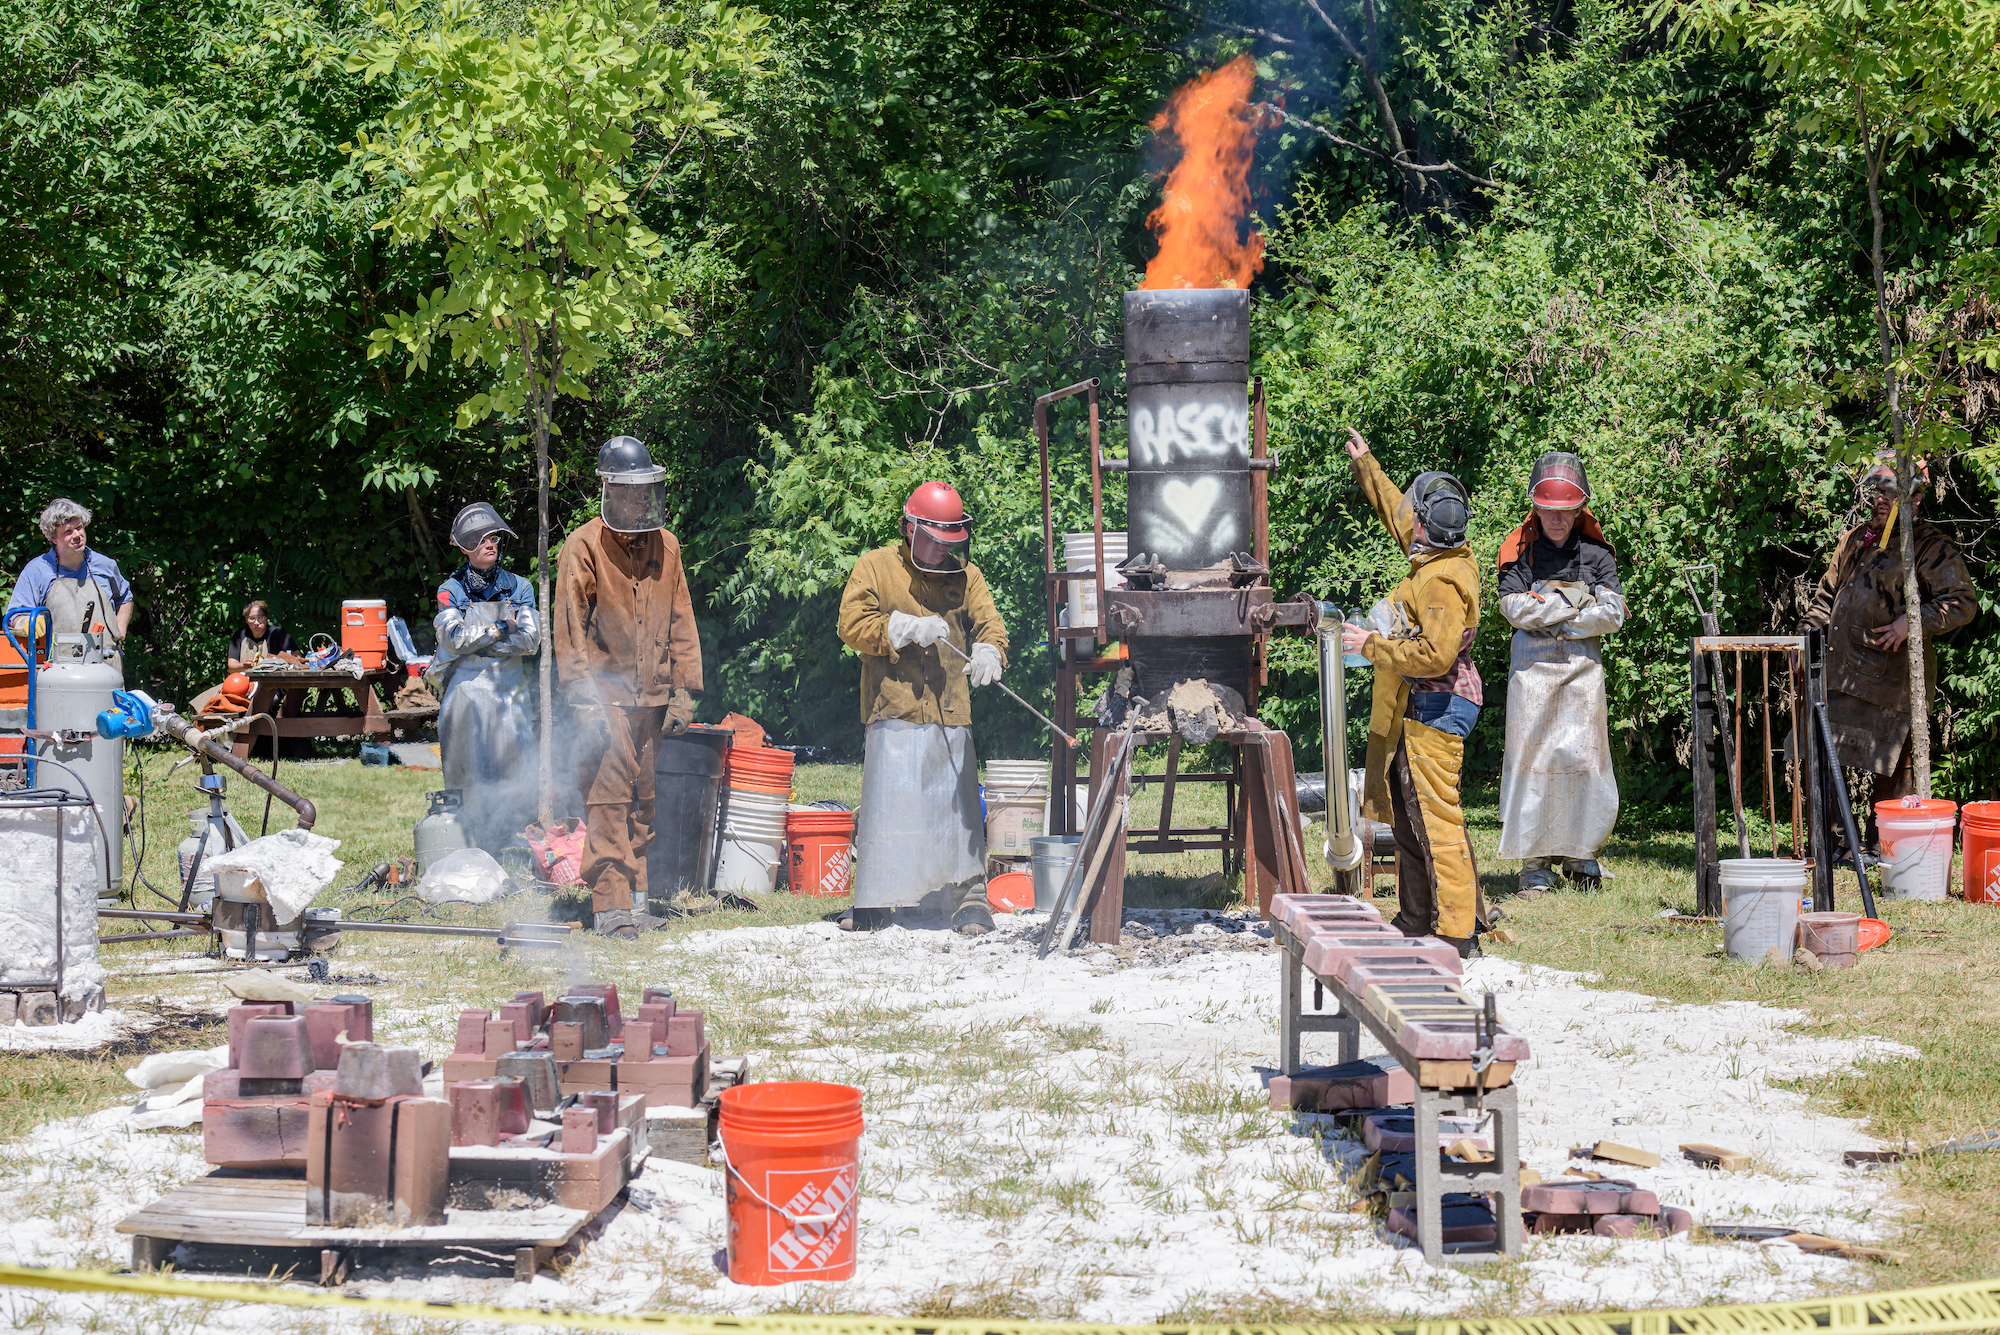 A community iron pour at Falls Art Foundry hosted by the Speed Art Museum Saturday, June 18, 2022, in the Portland neighborhood as part of “The Promise” workshop reflecting on guns and gun violence affecting the Black community in Louisville, Ky. (Photo by Brian Bohannon)